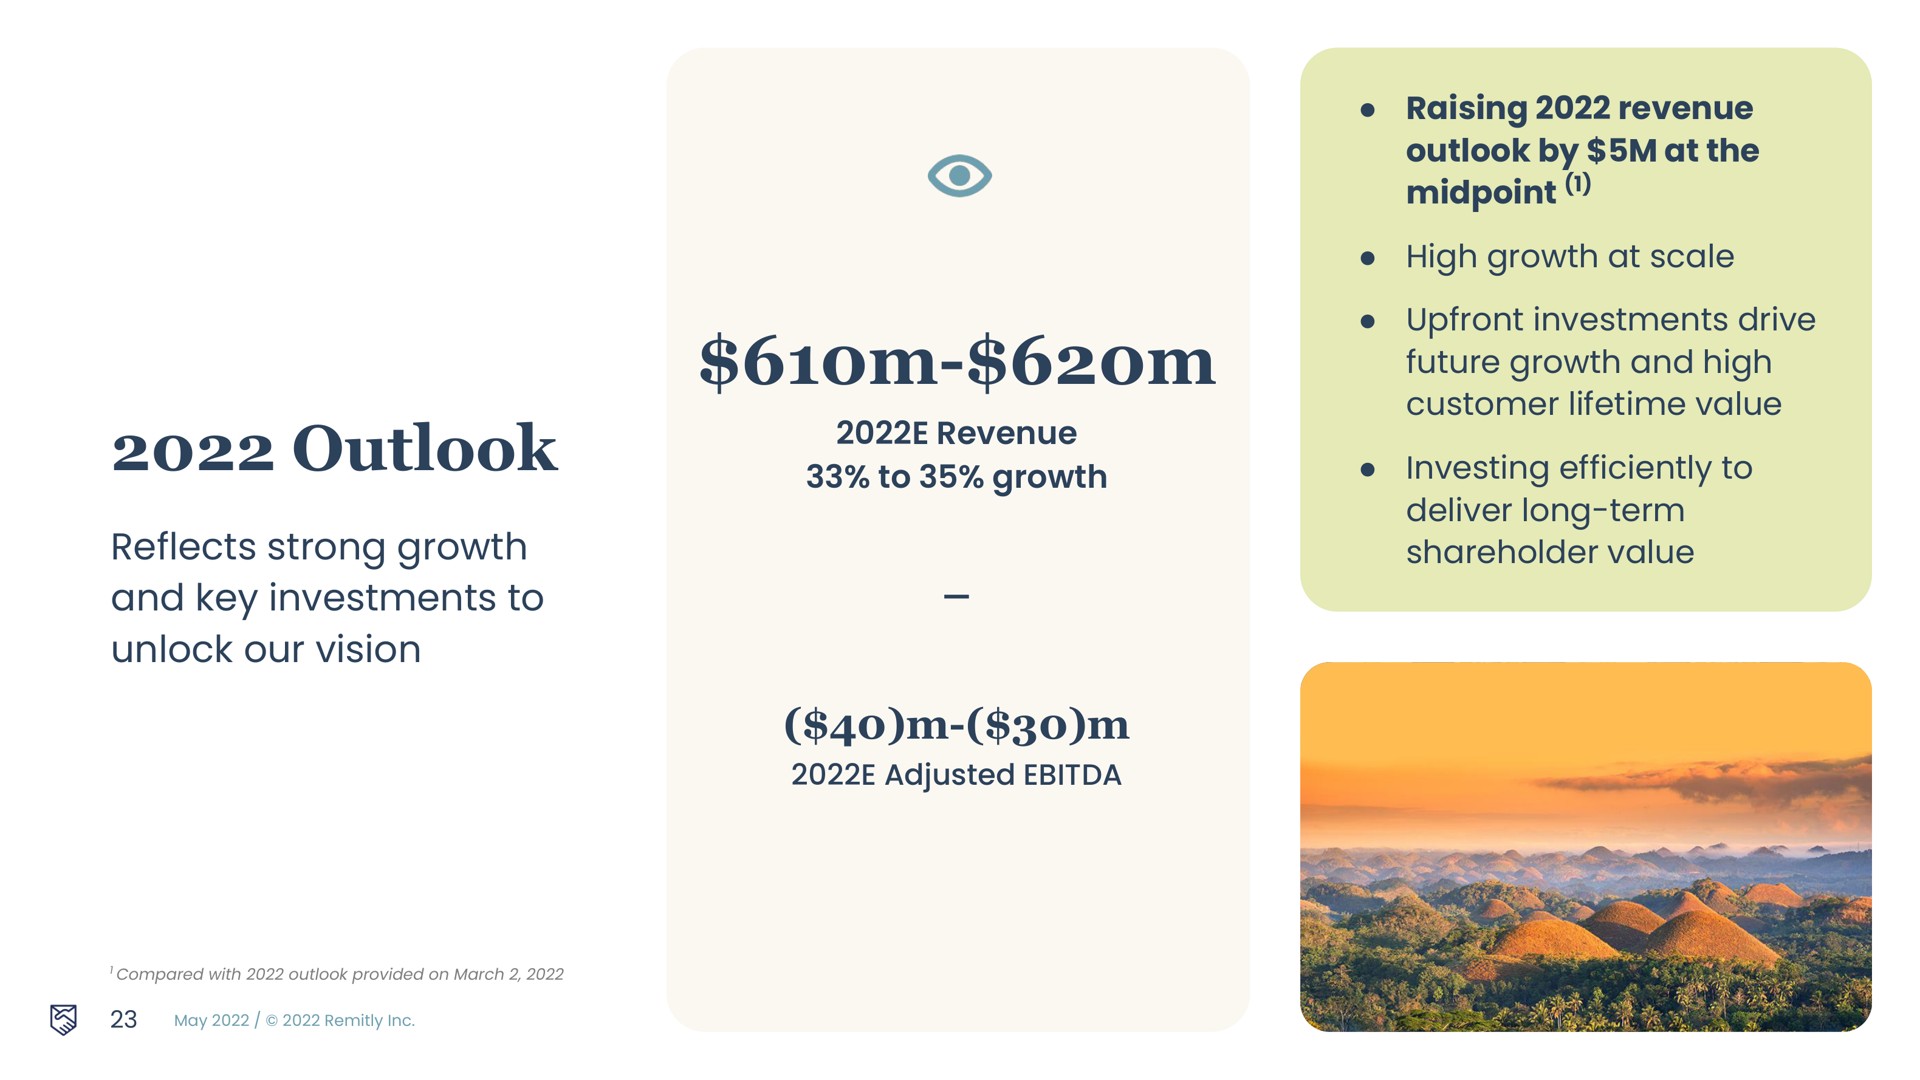 raising revenue outlook by at the high growth at scale investments drive future growth and high customer lifetime value investing efficiently to deliver long term shareholder value revenue to growth adjusted outlook reflects strong growth and key investments to unlock our vision | Remitly